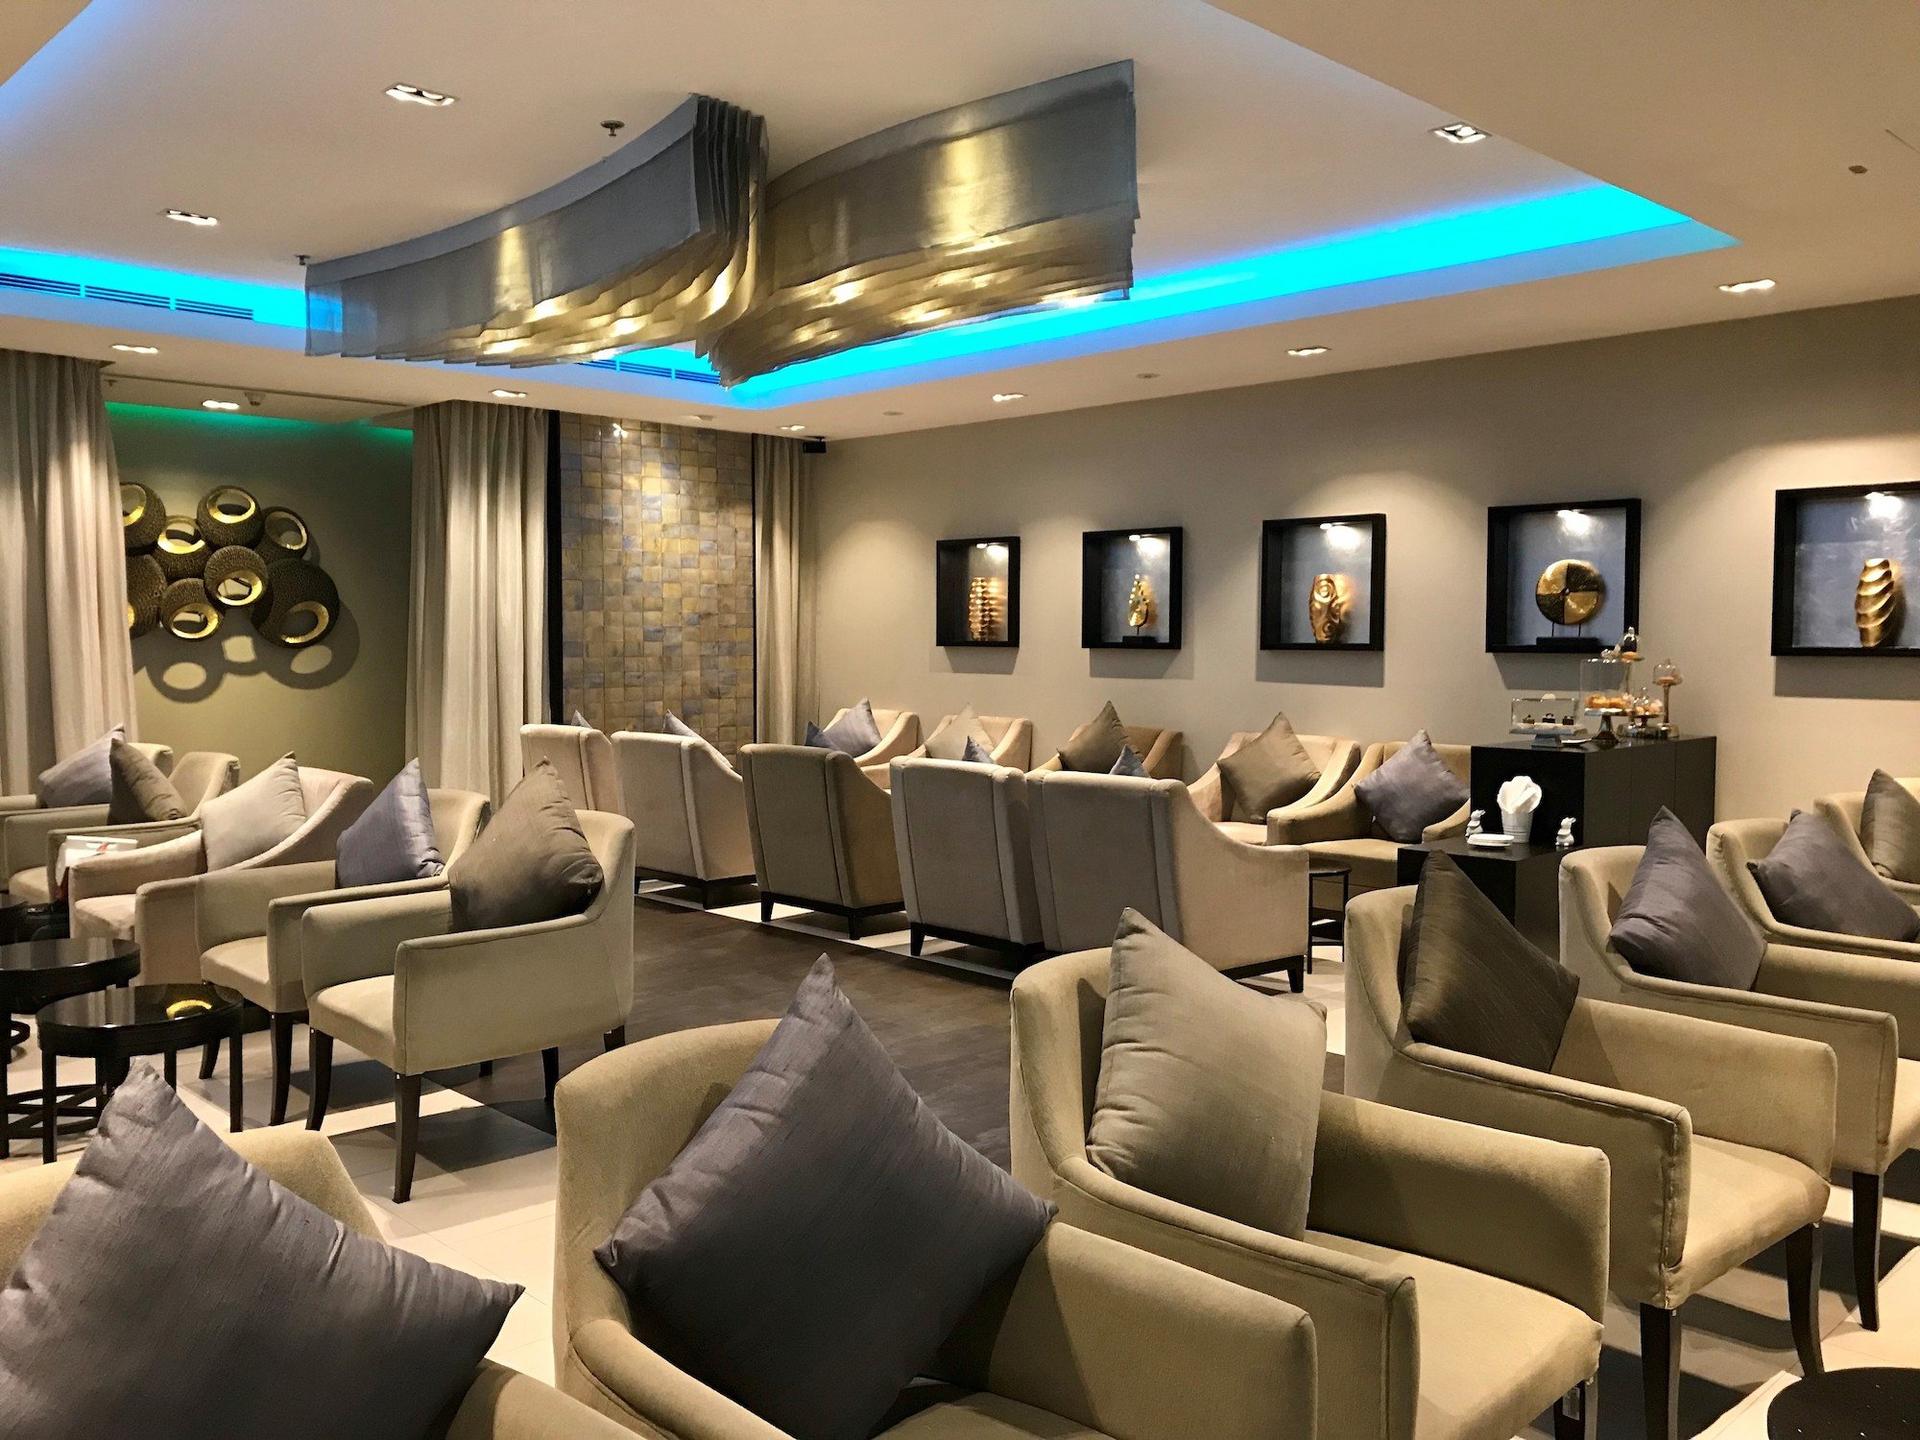 Oman Air First and Business Class Lounge image 48 of 50